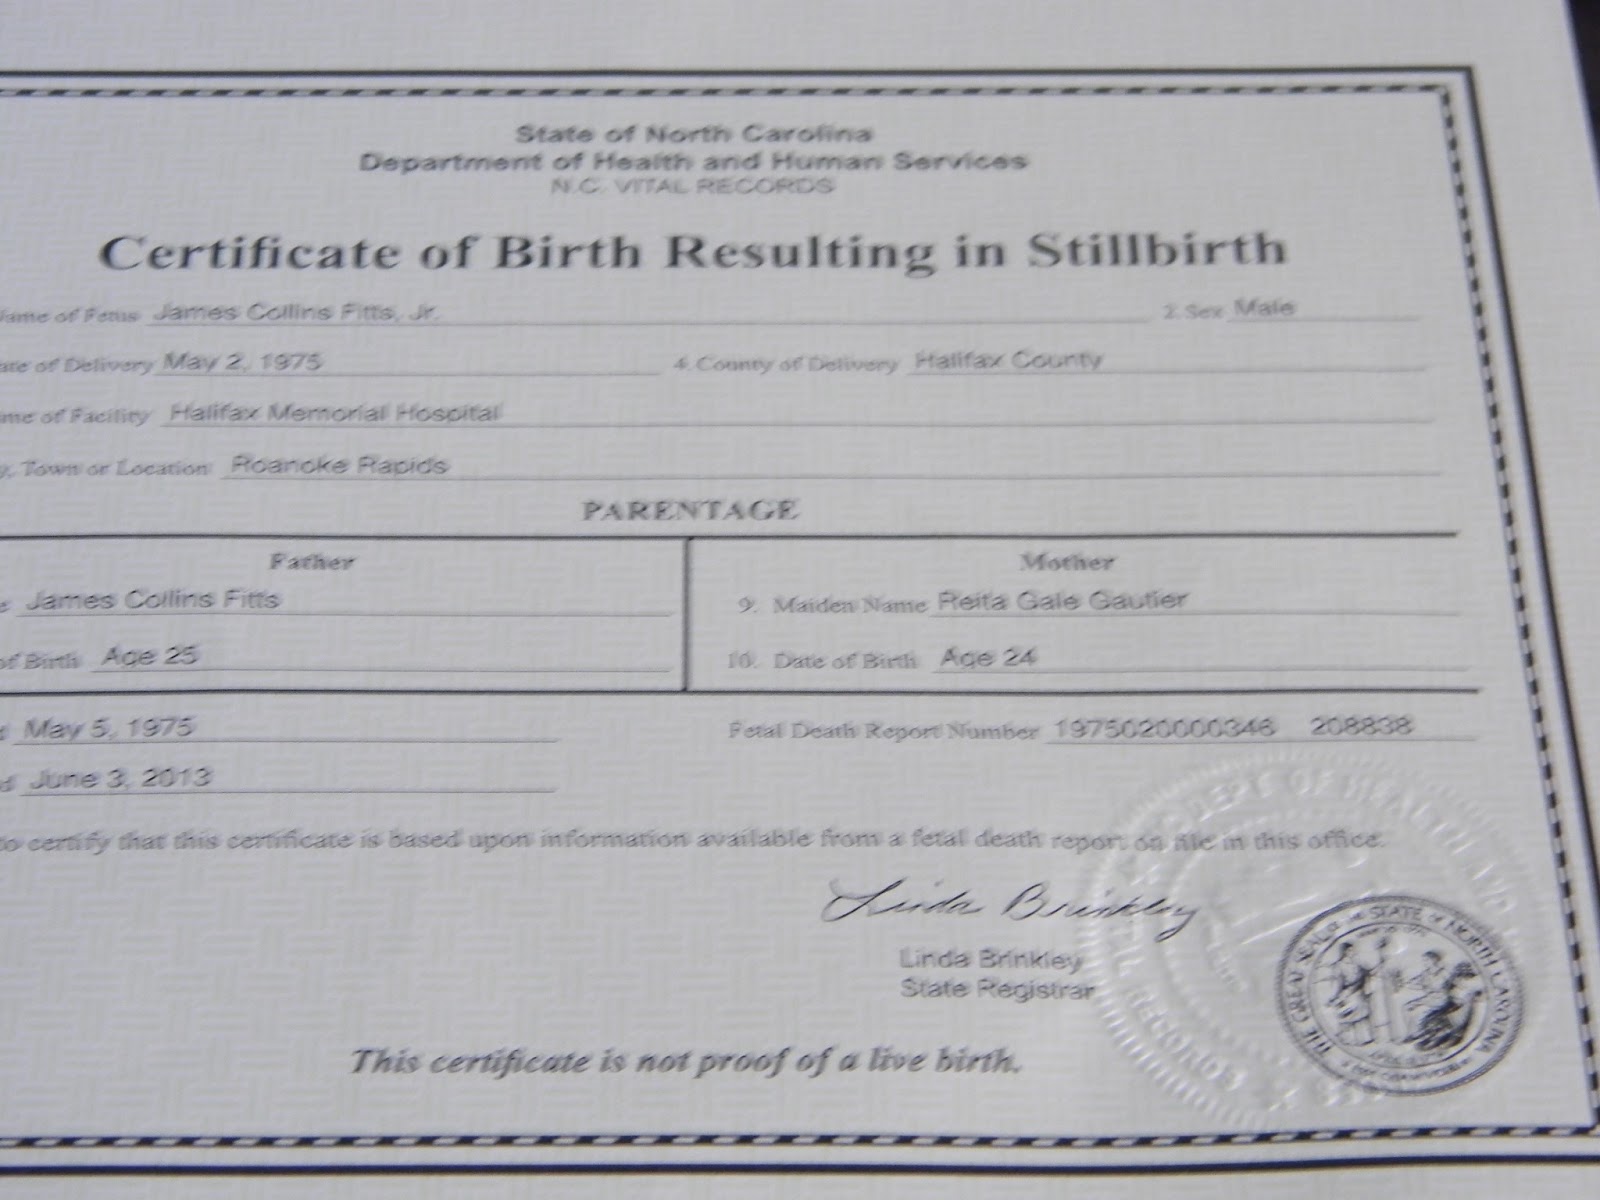 Fittsie's Angels Certificate of Birth Resulting in Stillbirth Arrived!